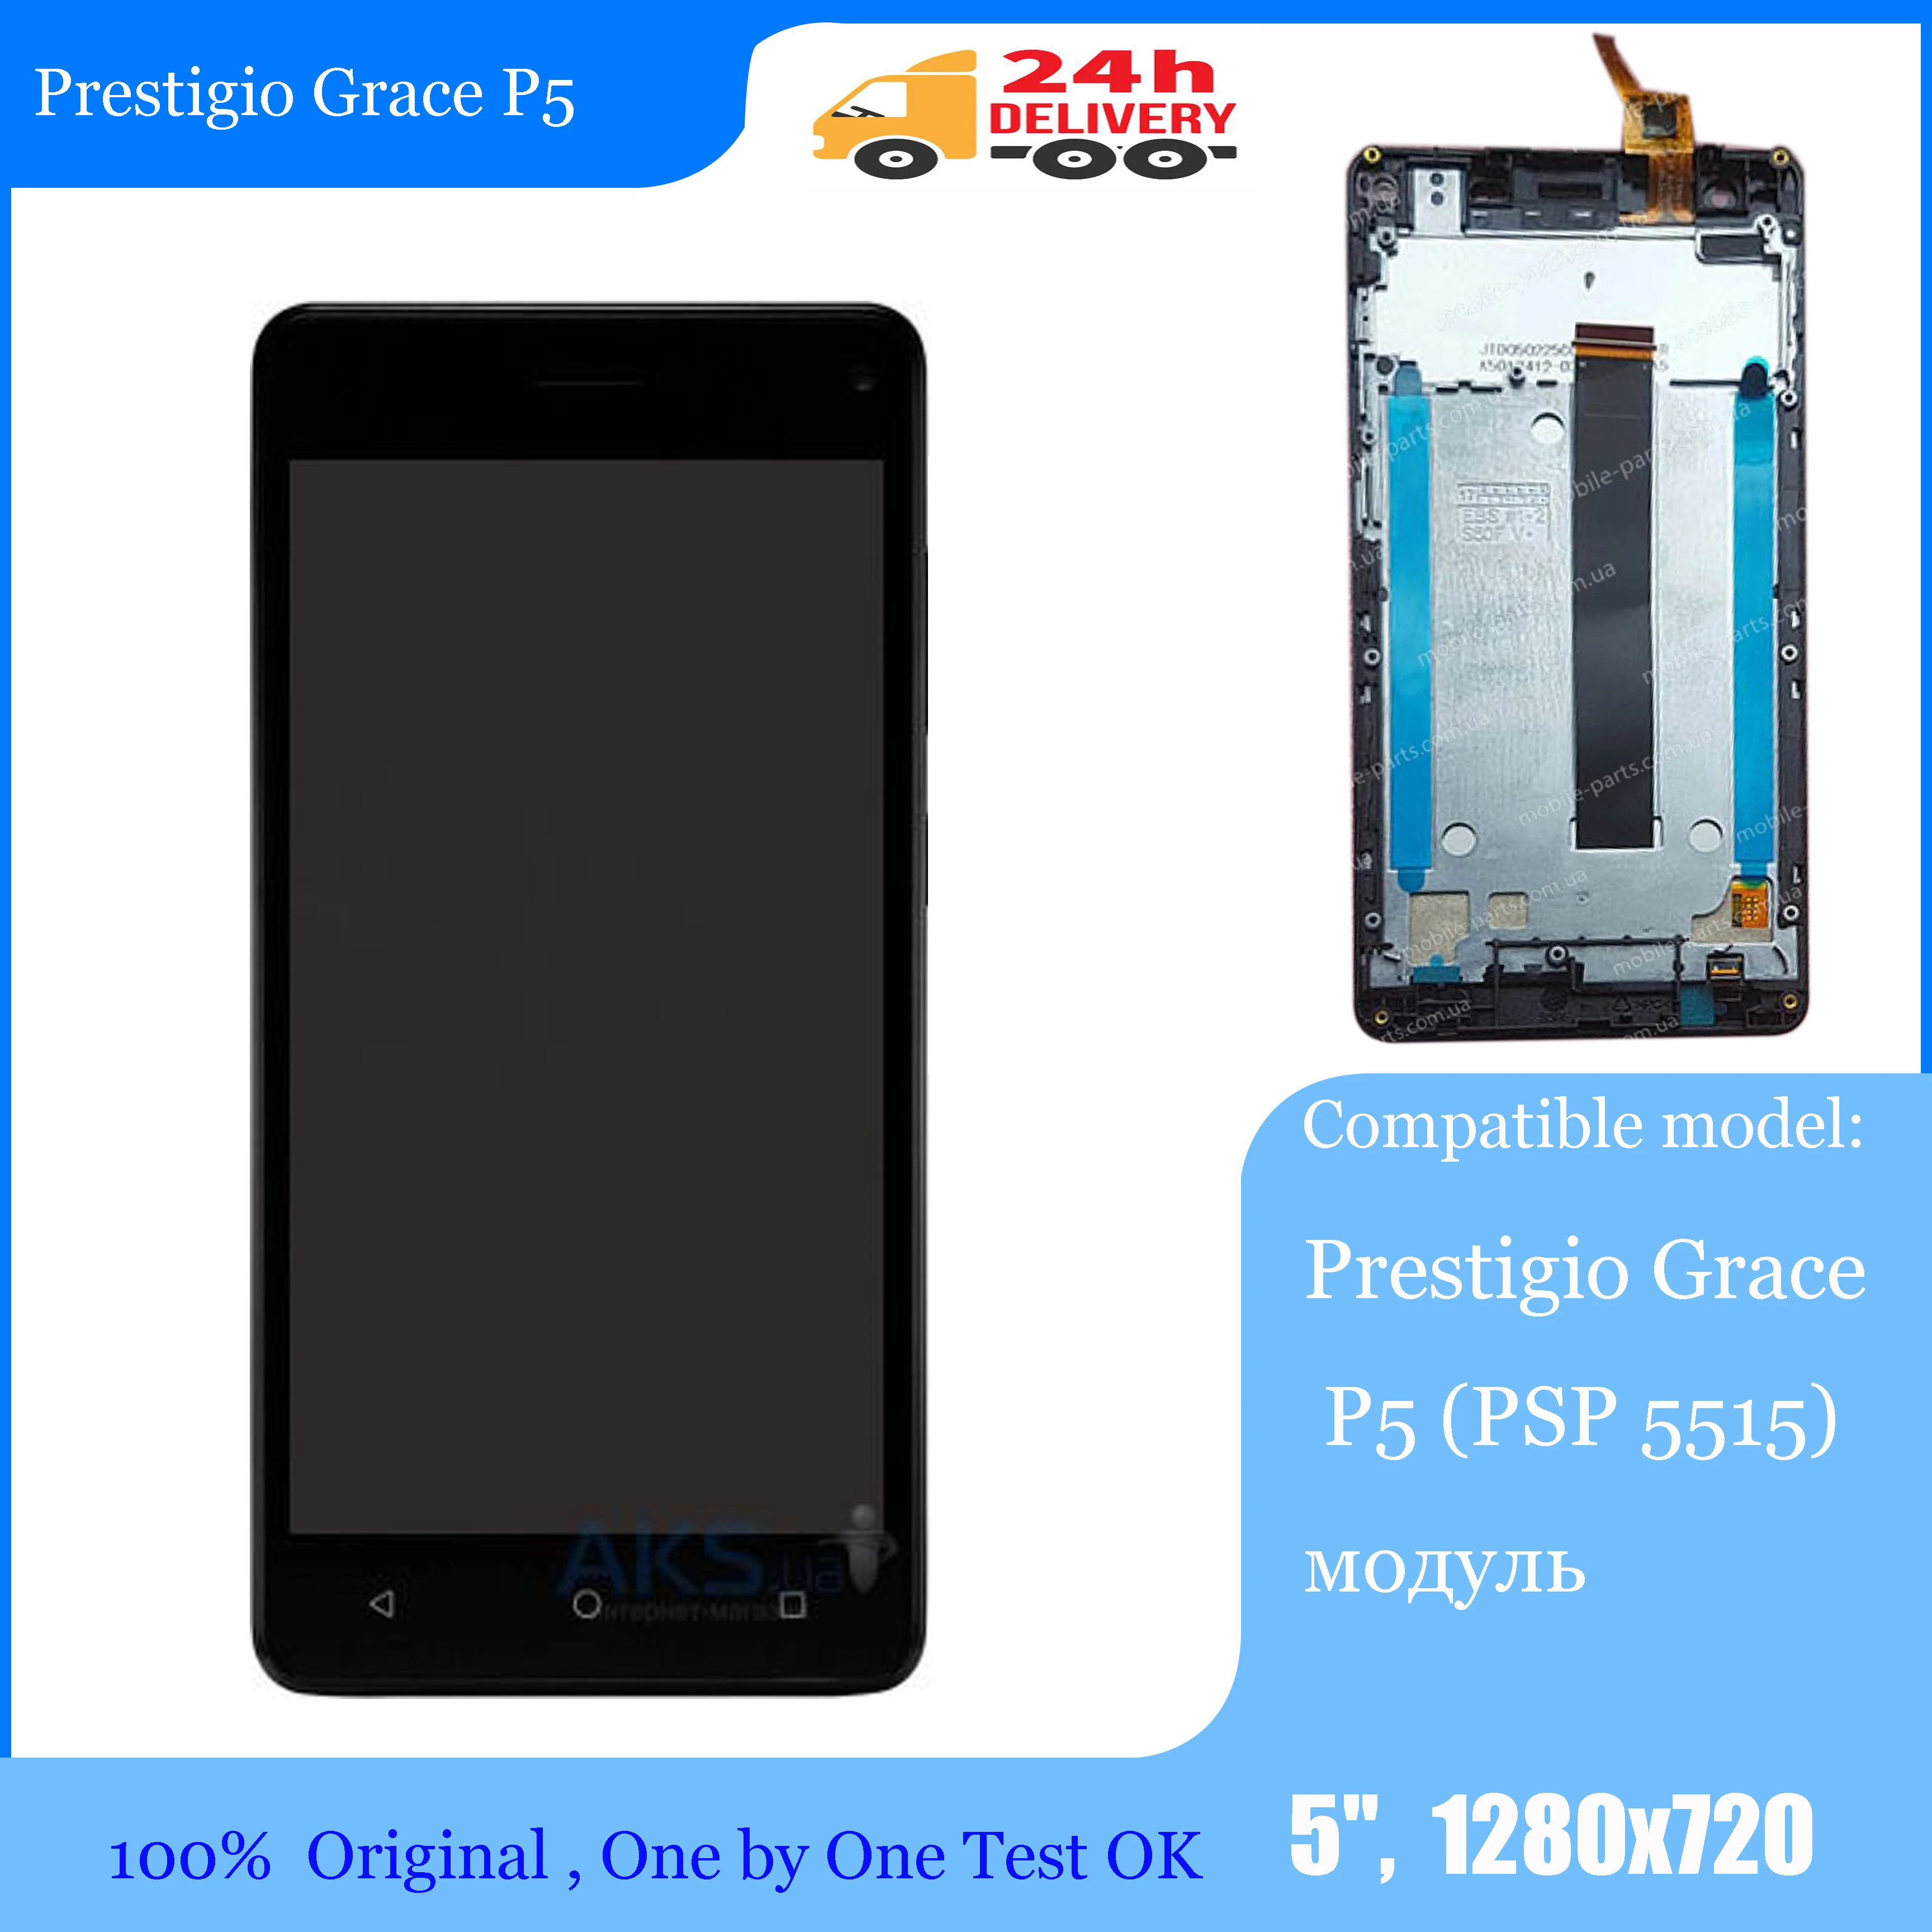 

New 5.0inch For Prestigio Grace P5 PSP5515DUO touch Screen with Lcd Display panel lens glass Digitizer for Grace P5 PSP5515 Duo